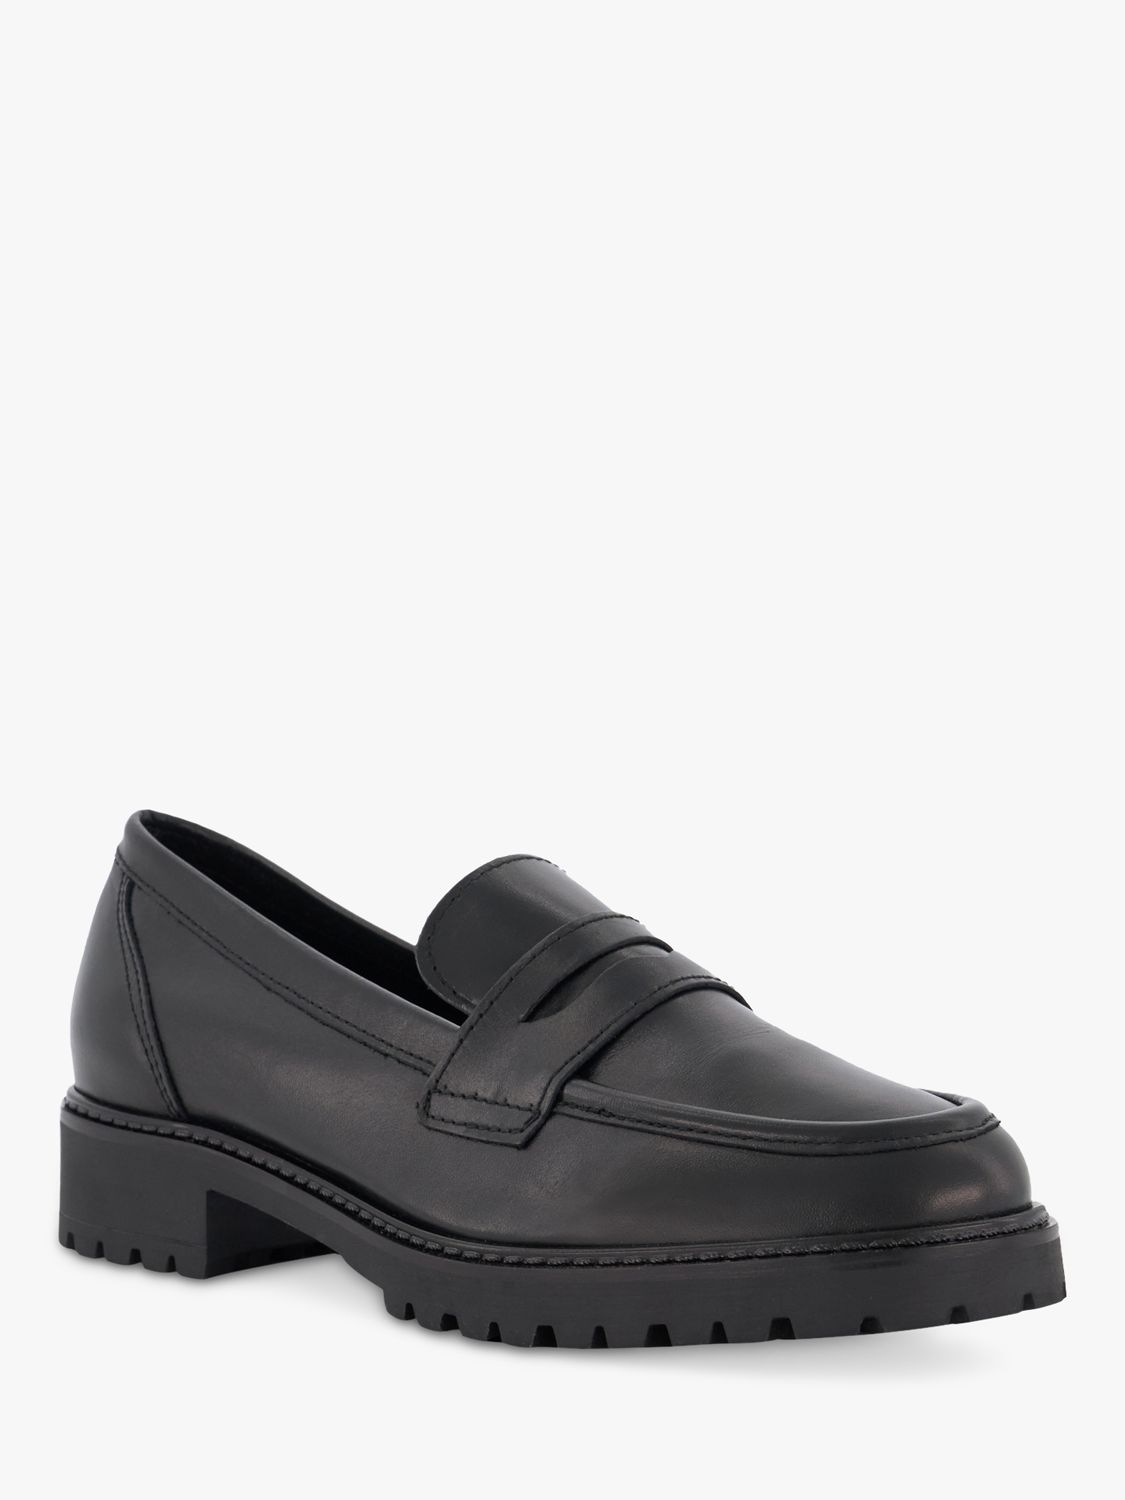 Dune Wide Fit Gild Leather Loafers, Black at John Lewis & Partners